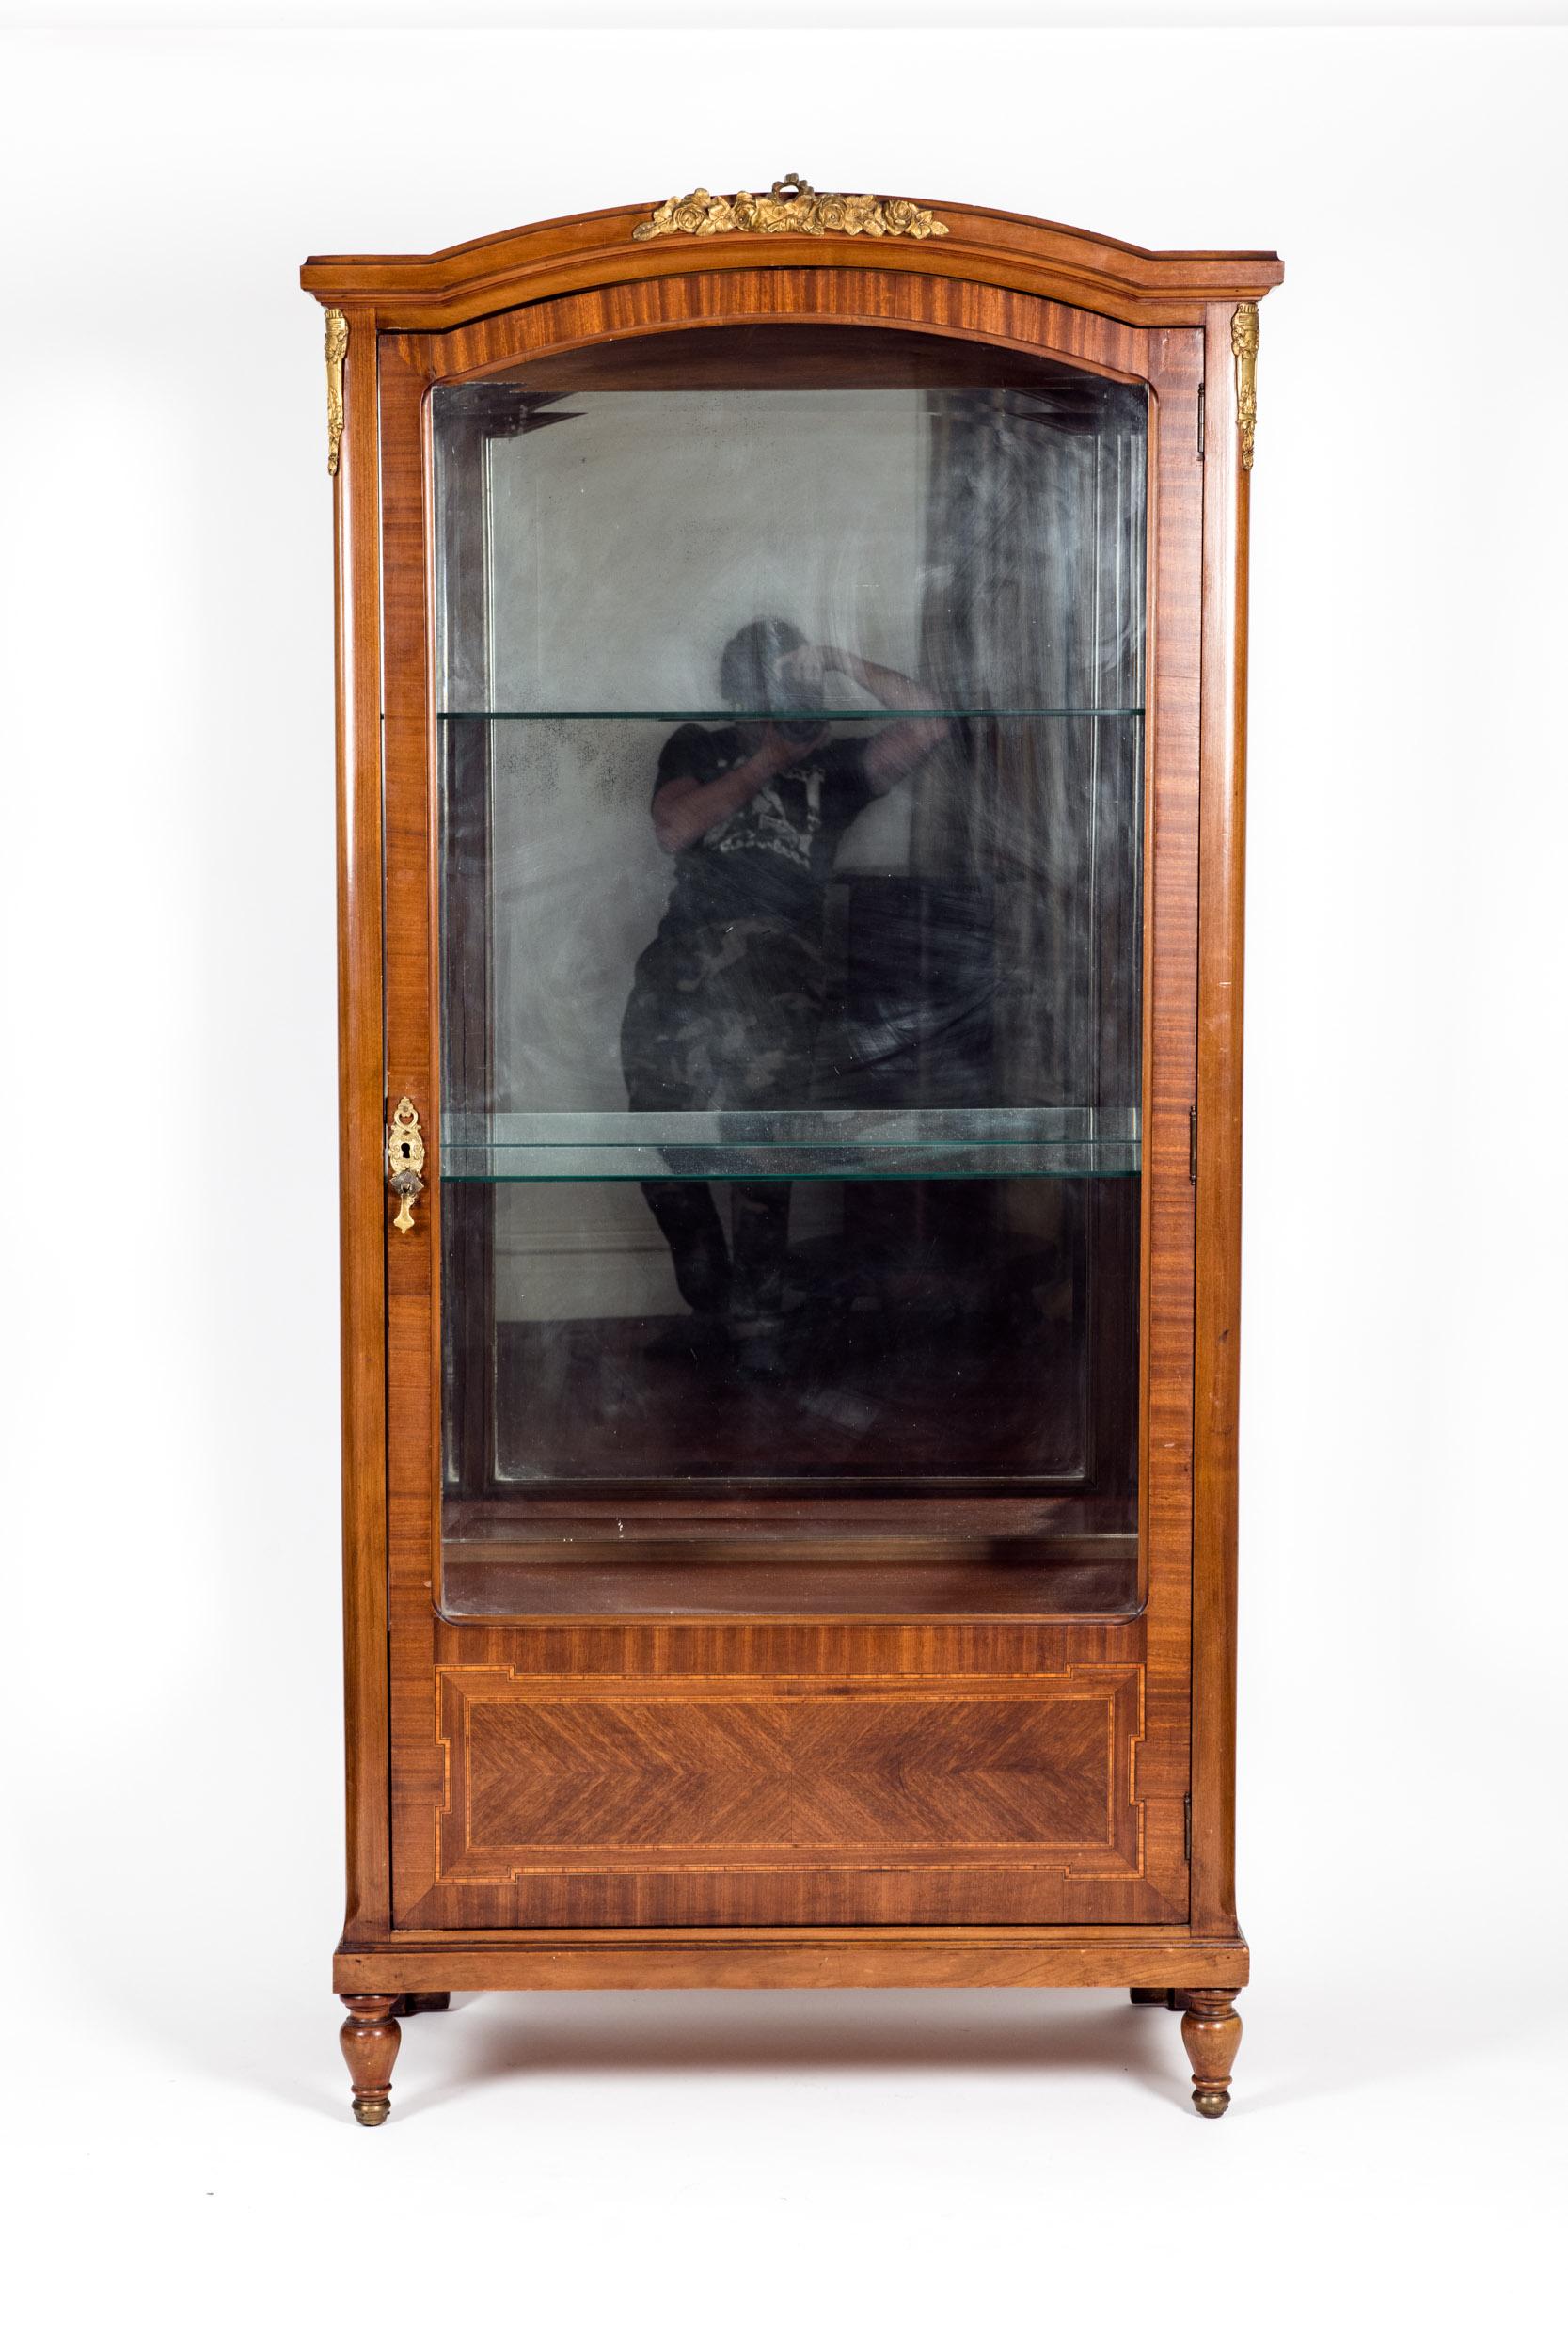 Late 19th century French burl wood vitrine / cabinet with applied bronze details and interior glass shelves. The cabinet / vitrine is in good antique condition with wear consistent with age / use. The cabinet stand about 71 inches high X 35 inches